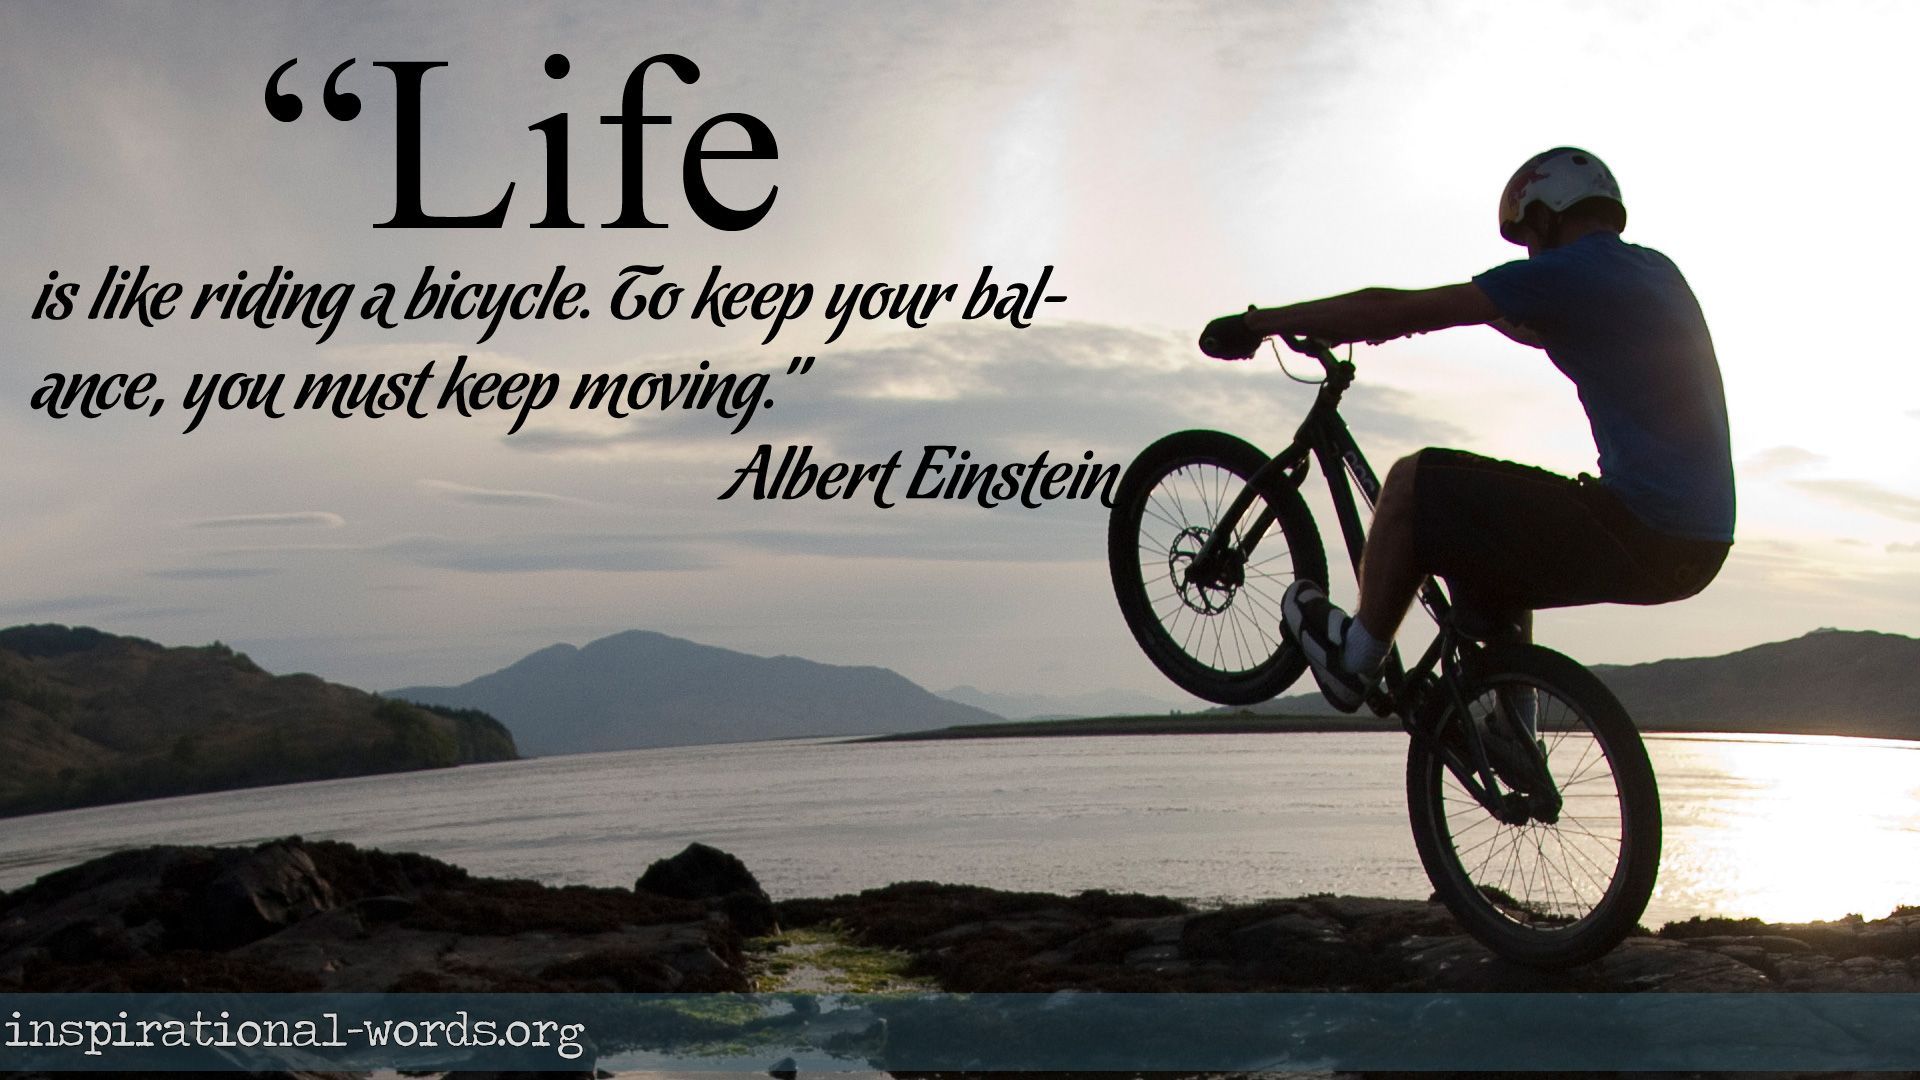 Quotes Albert Einstein Quote E2809clife Is Likeing Bicycle To Keep Your Balance You Must Moving Wallpaper Quotefancy Staggering Life 44 Staggering Life Like Riding Bicycle